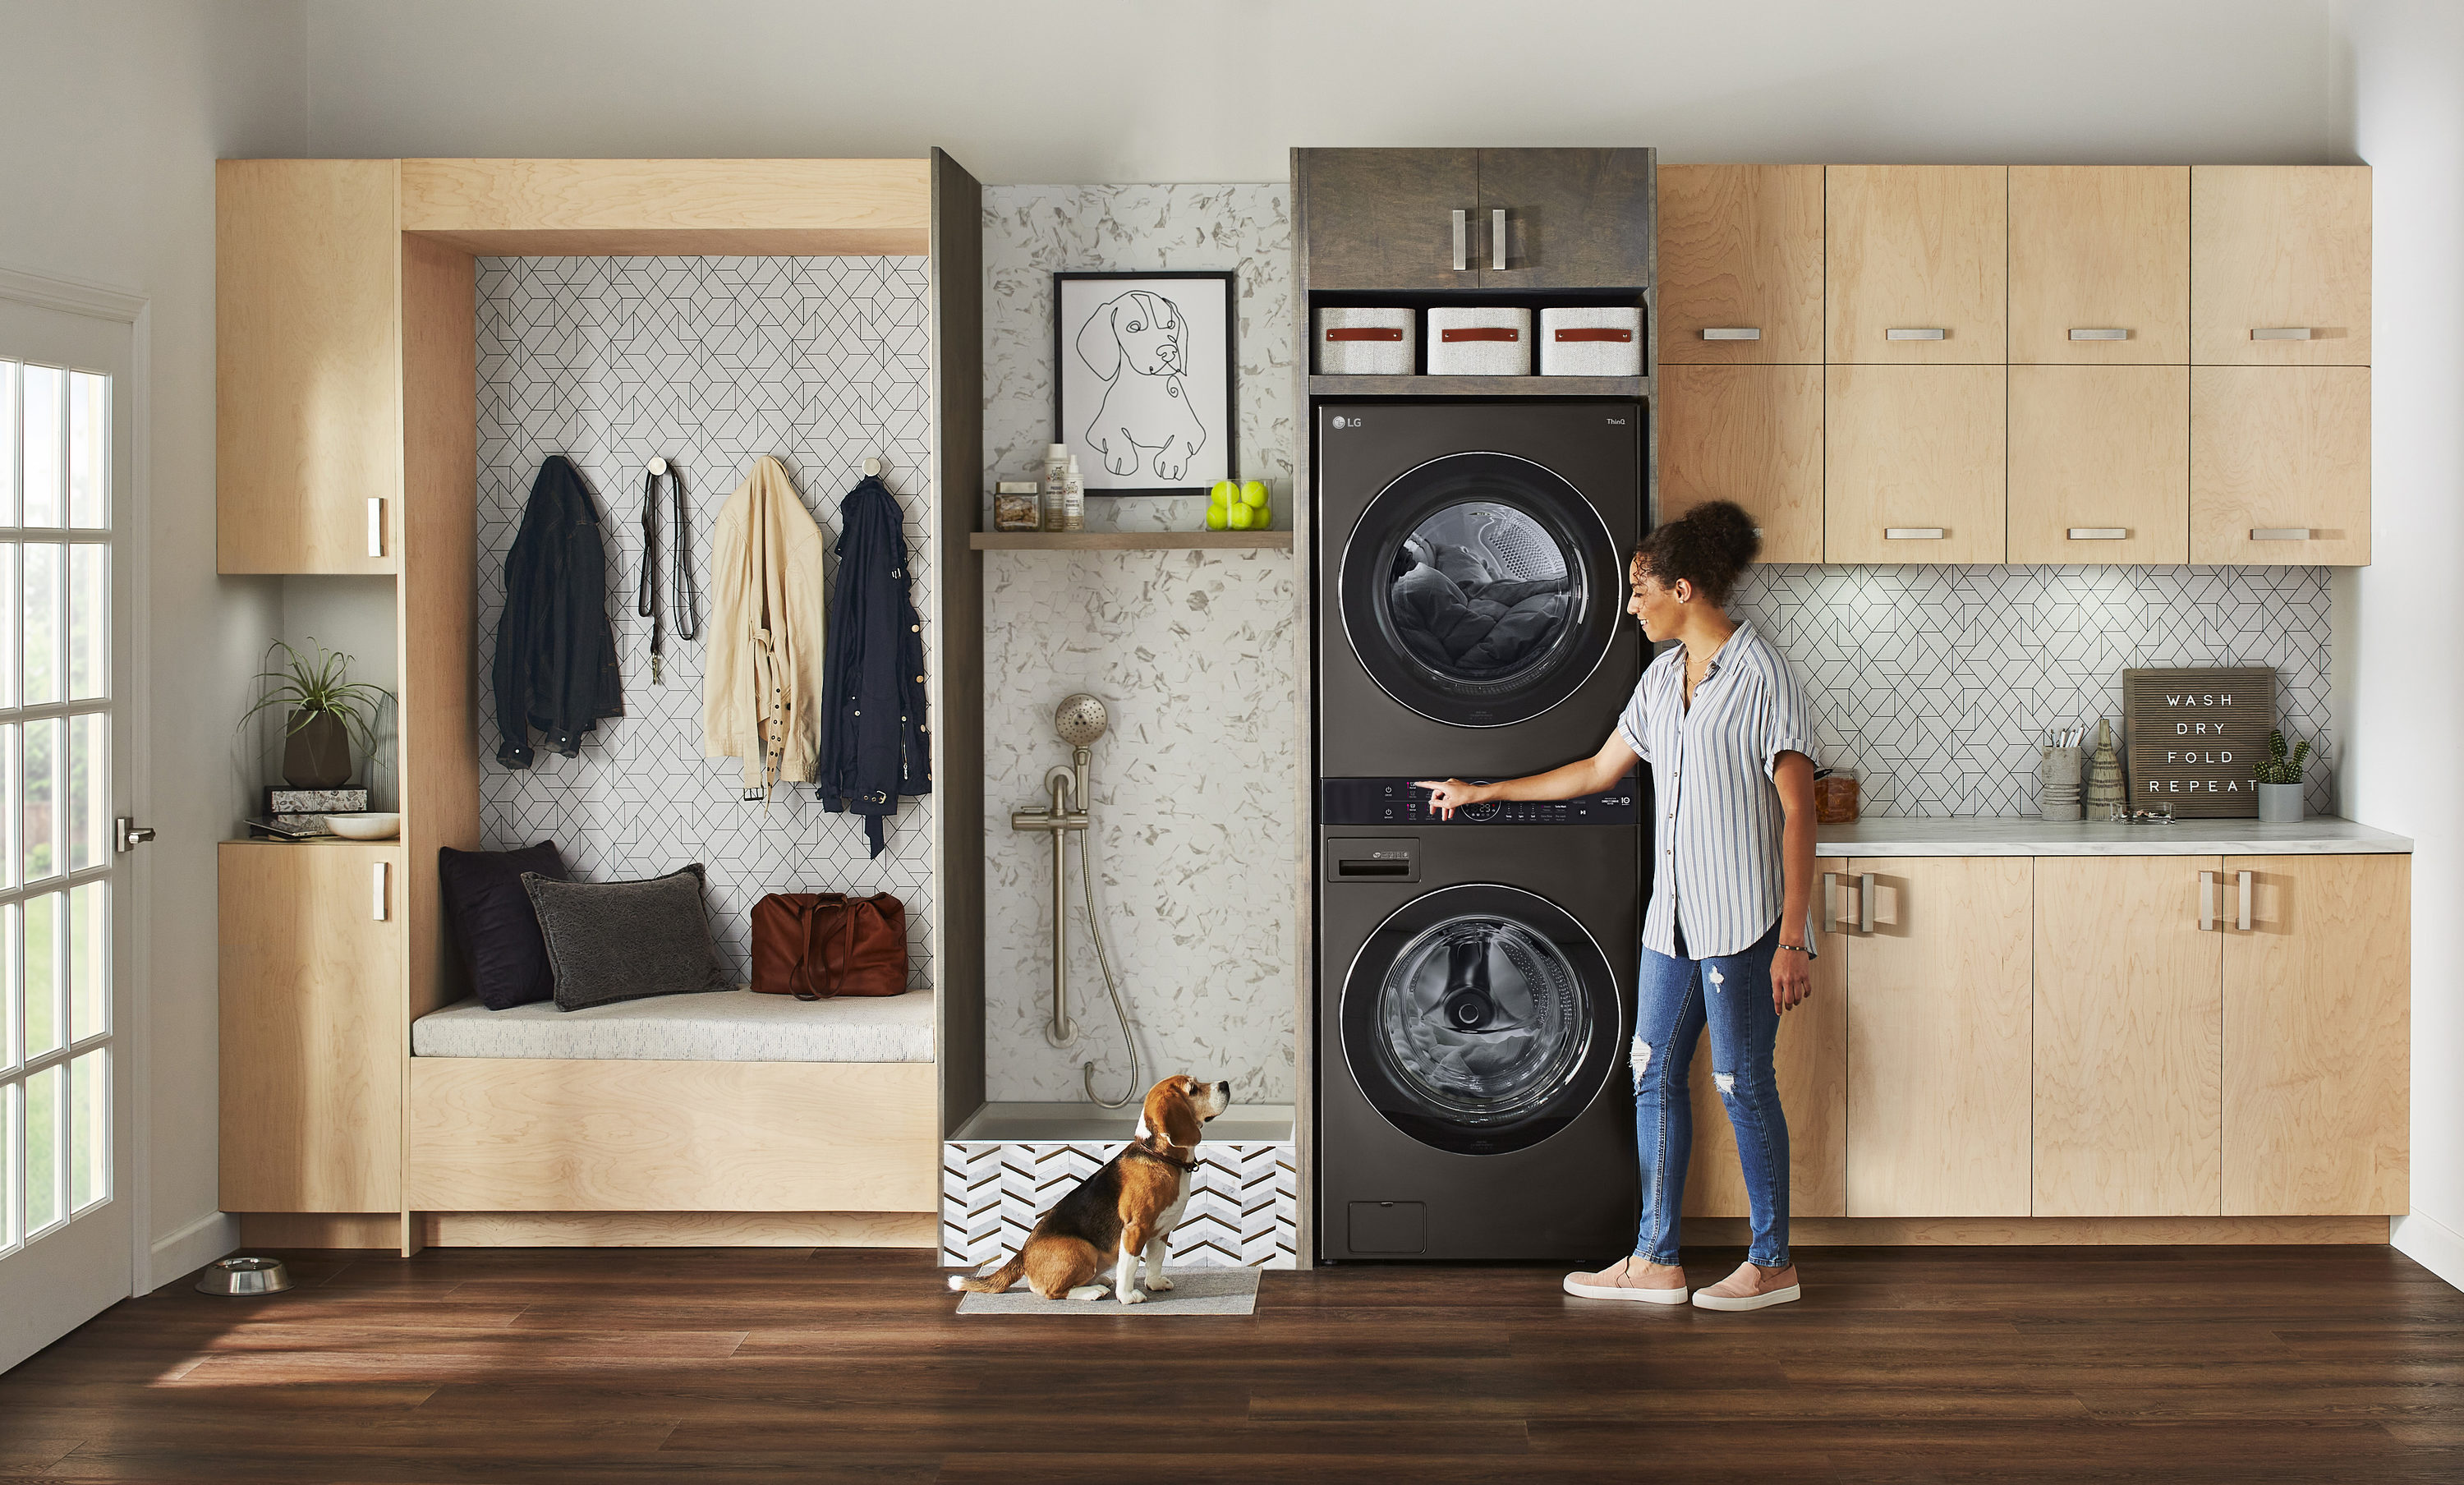 LG WashTower Electric Stacked and ft department in (ENERGY Centers the ft Dryer Stacked STAR) Washer Center Laundry at 4.5-cu Laundry 7.4-cu with